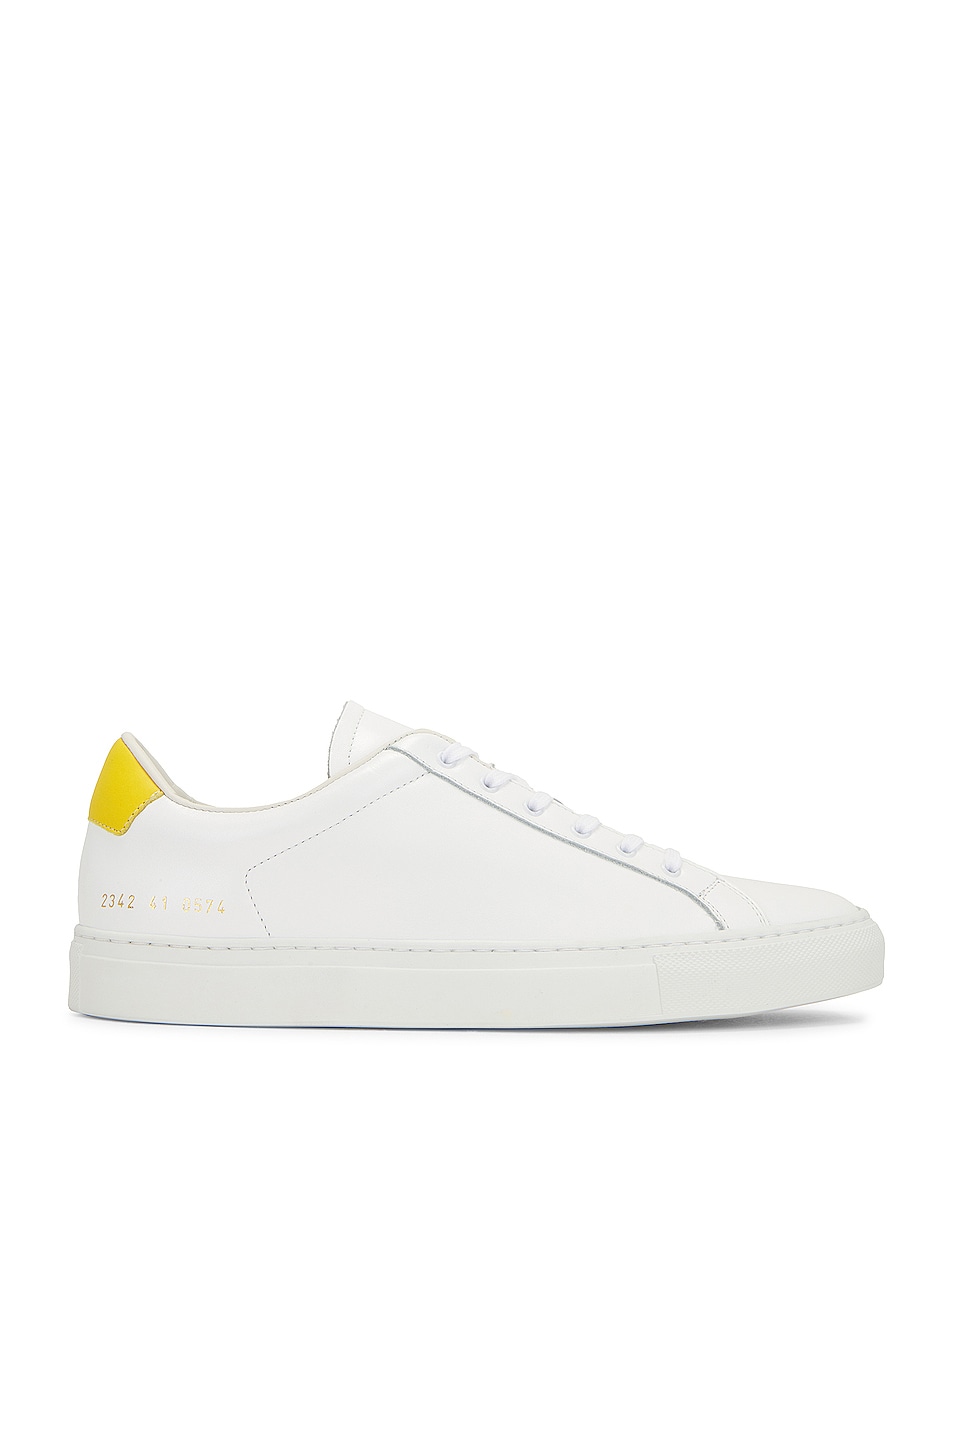 Image 1 of Common Projects Retro Low Article 2342 in White/Yellow